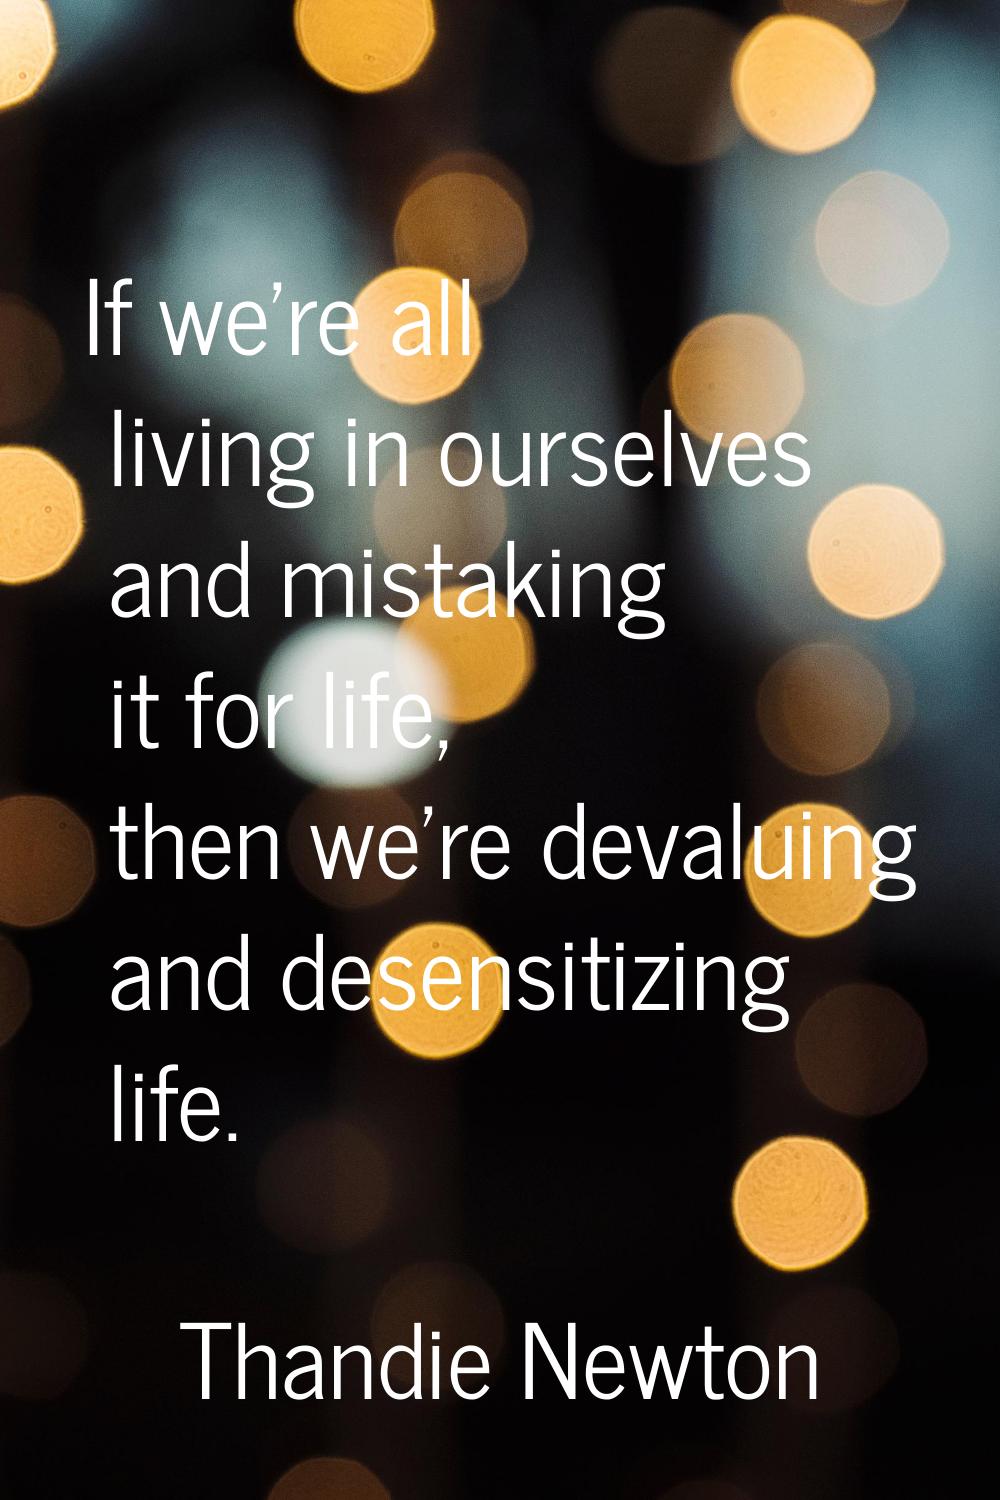 If we're all living in ourselves and mistaking it for life, then we're devaluing and desensitizing 